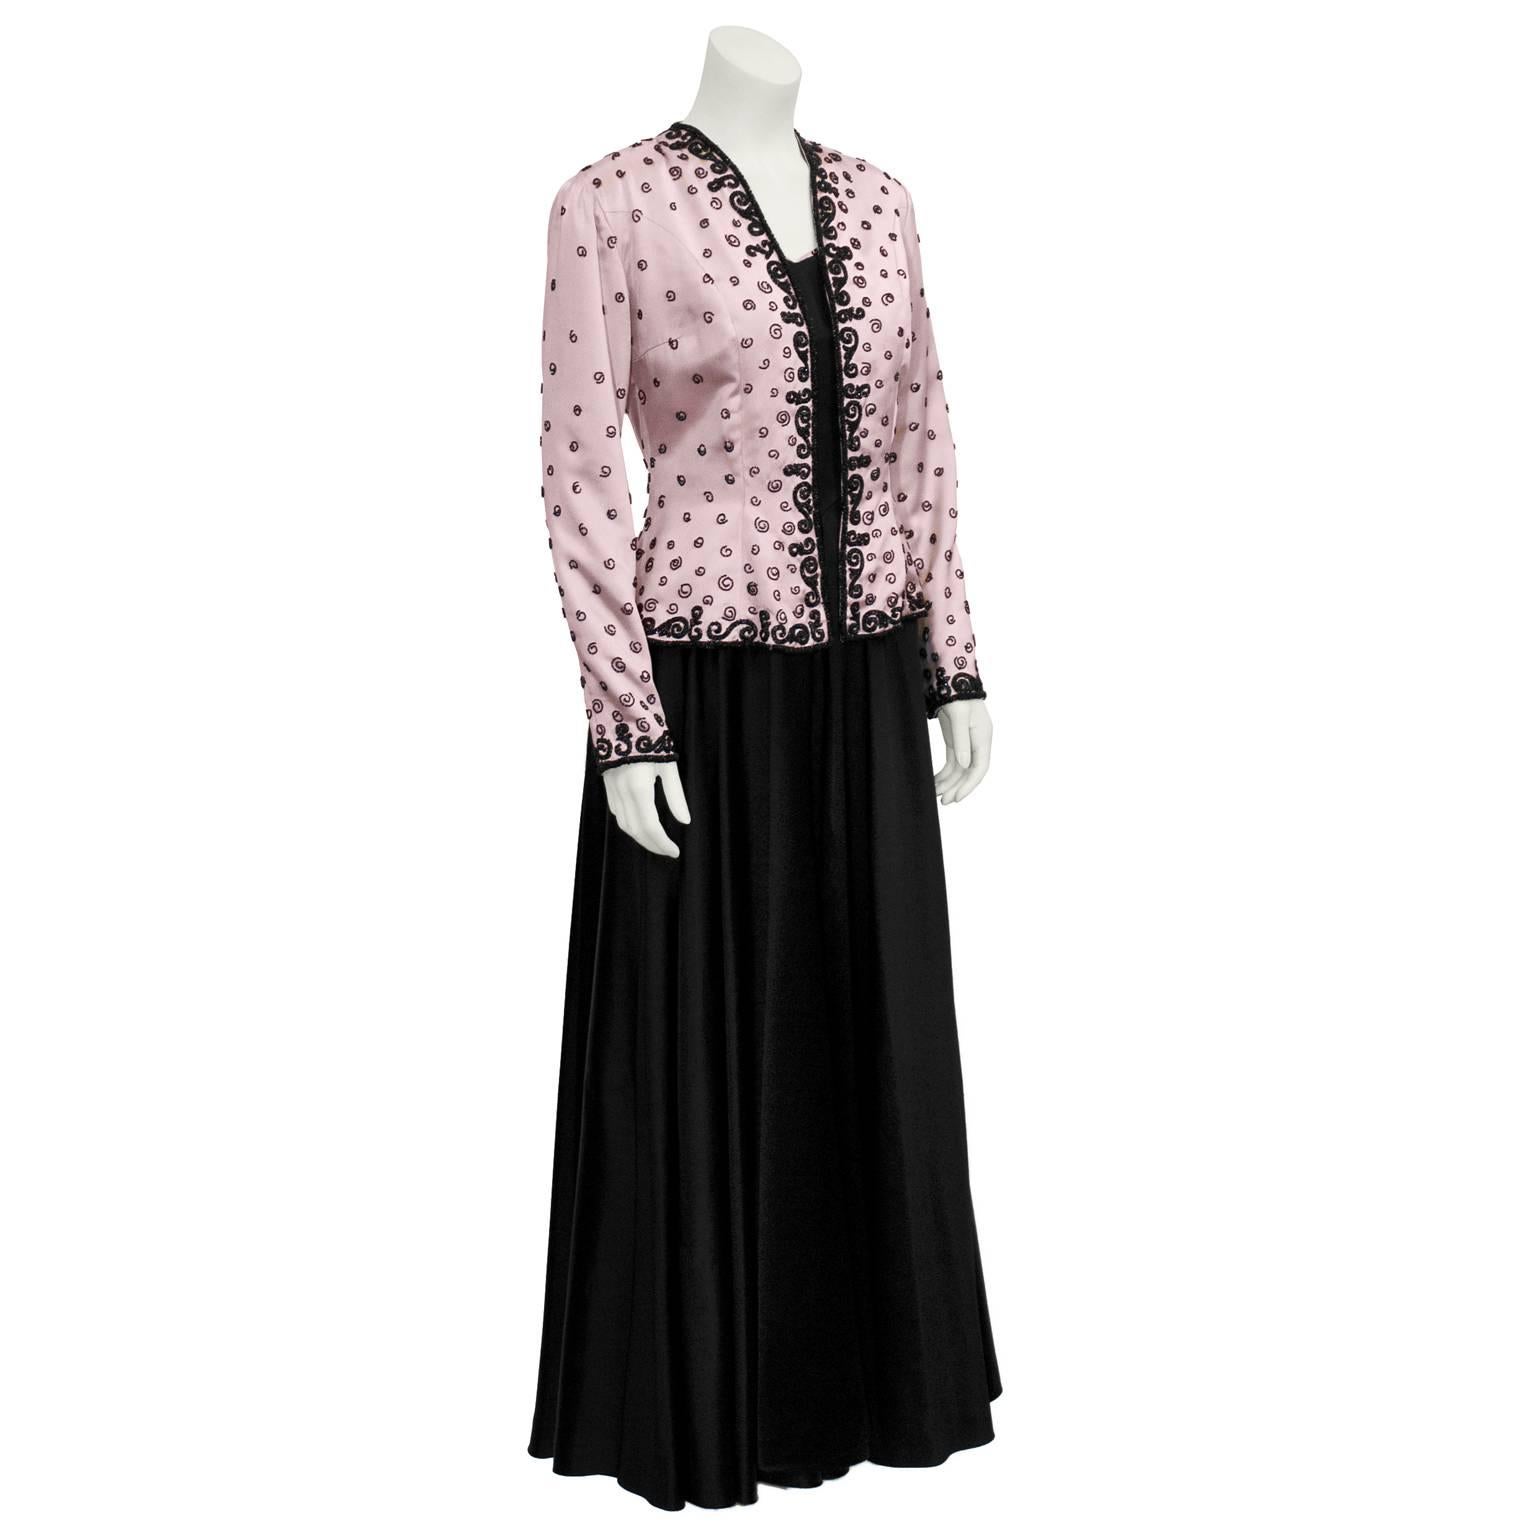 Amazing black satin gown with a matching pink satin jacket attributed to Schiaparelli from the 1940's. Purchased and worn in Toronto by an elegant socialite for her daughters wedding, it is believed to have been purchased at the T Eaton Company. 